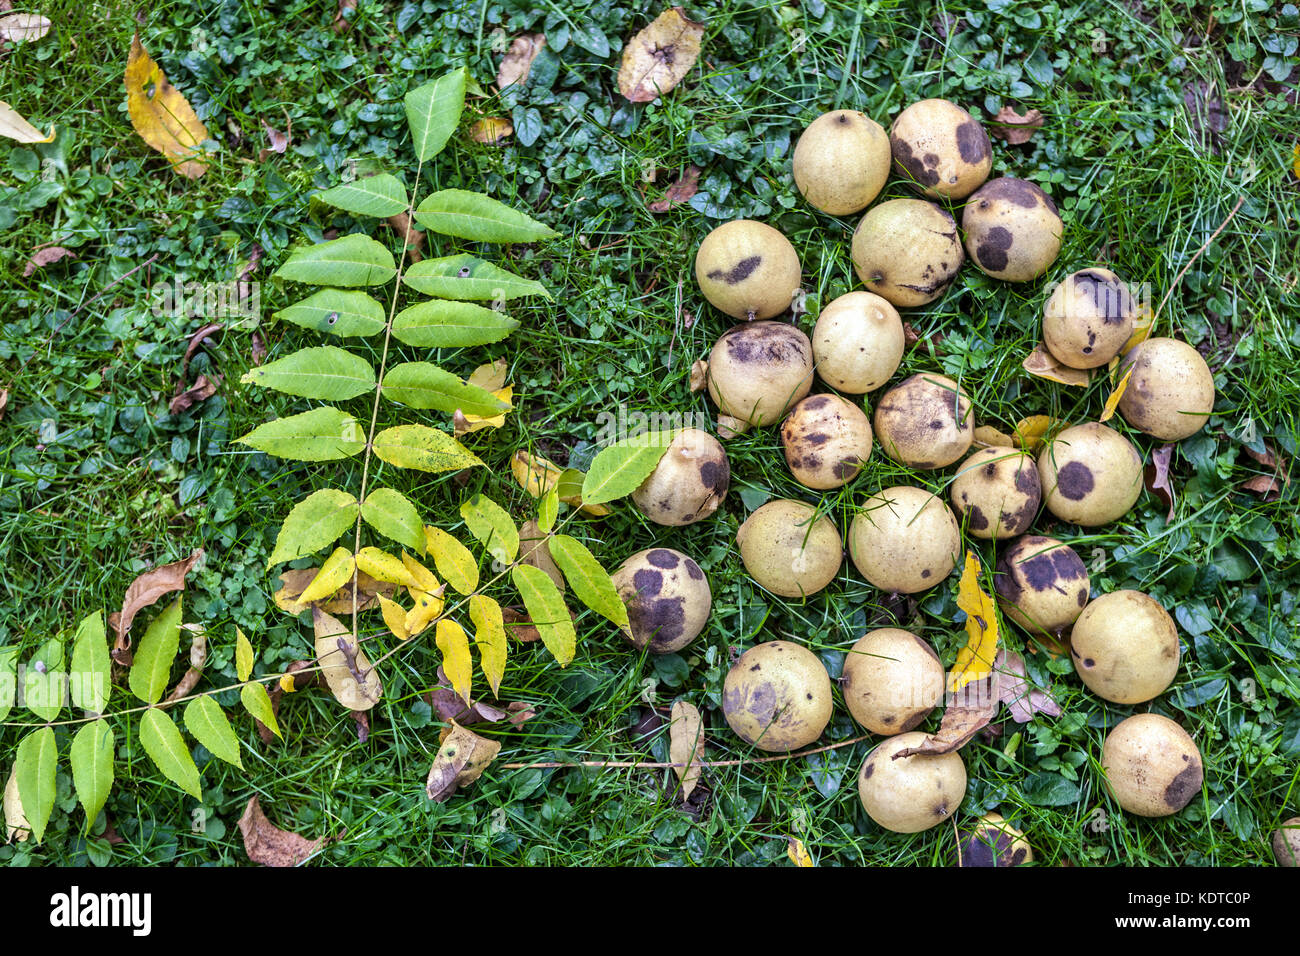 Juglans cathayensis or Juglans mandshurica, Chinese Walnut tree, autumn fallen leaves, and nuts Stock Photo